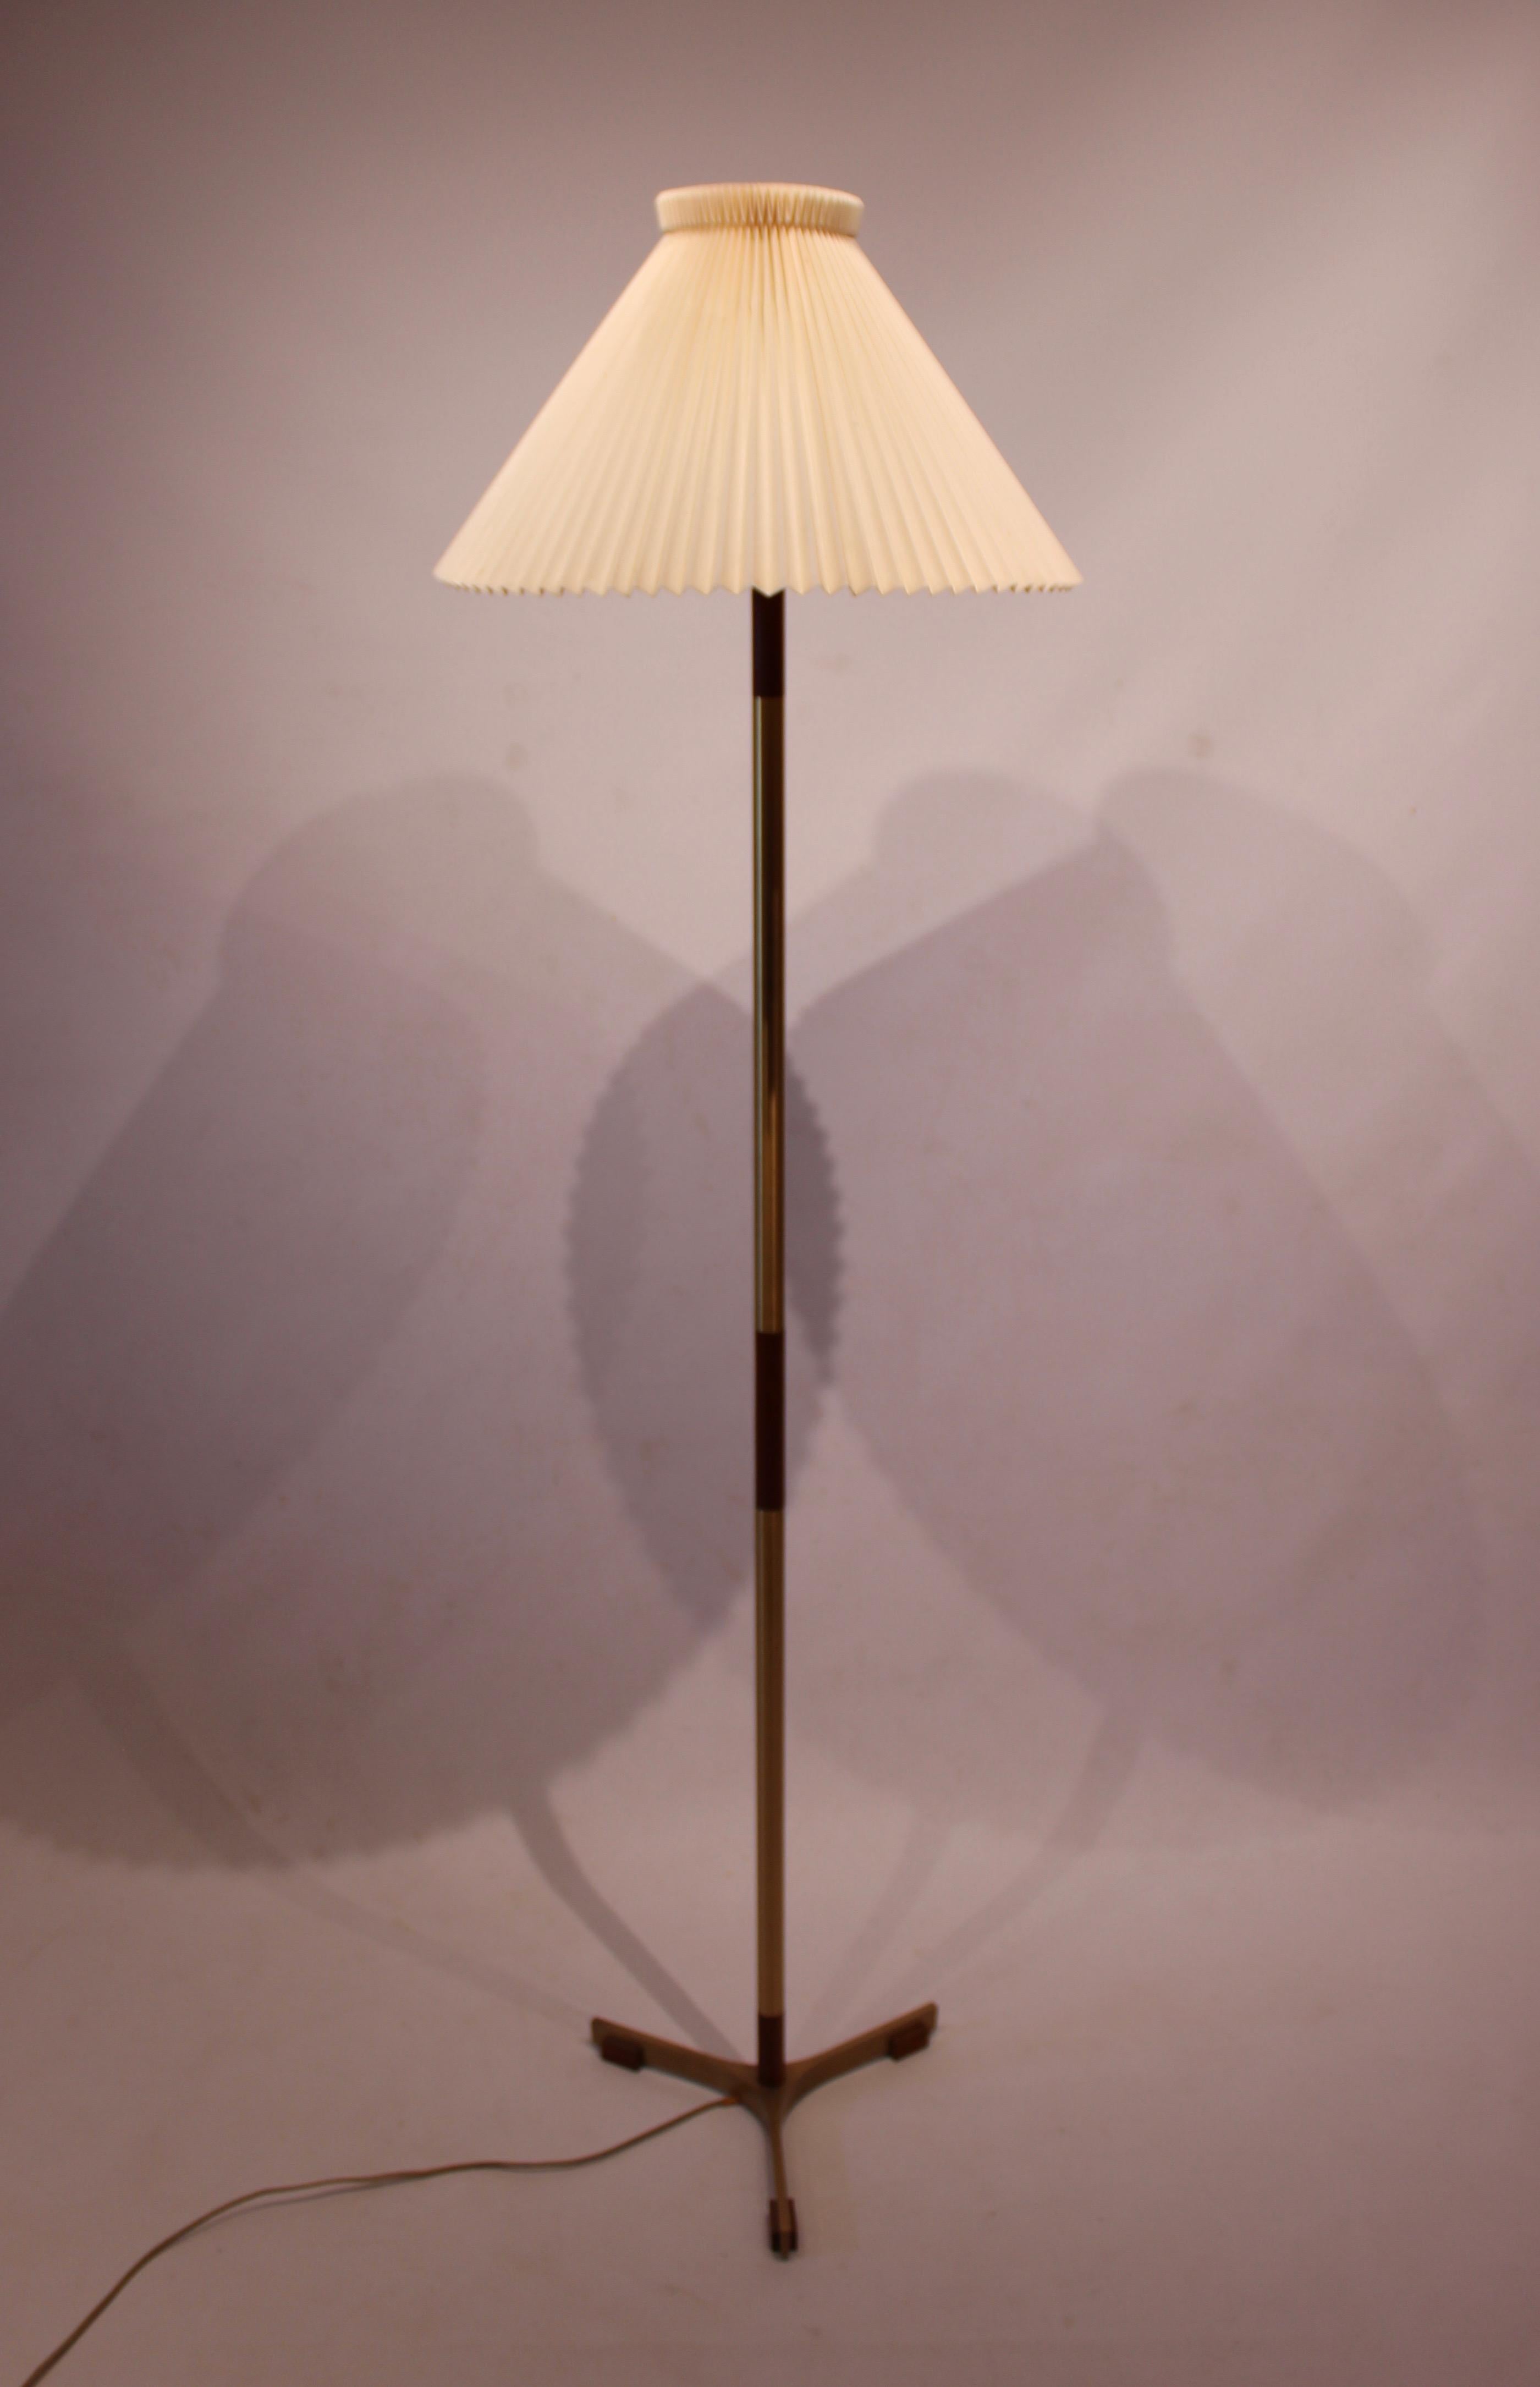 Tall floor lamp of teak and brass, of Danish design from the 1960s. The lamp is in great vintage condition.